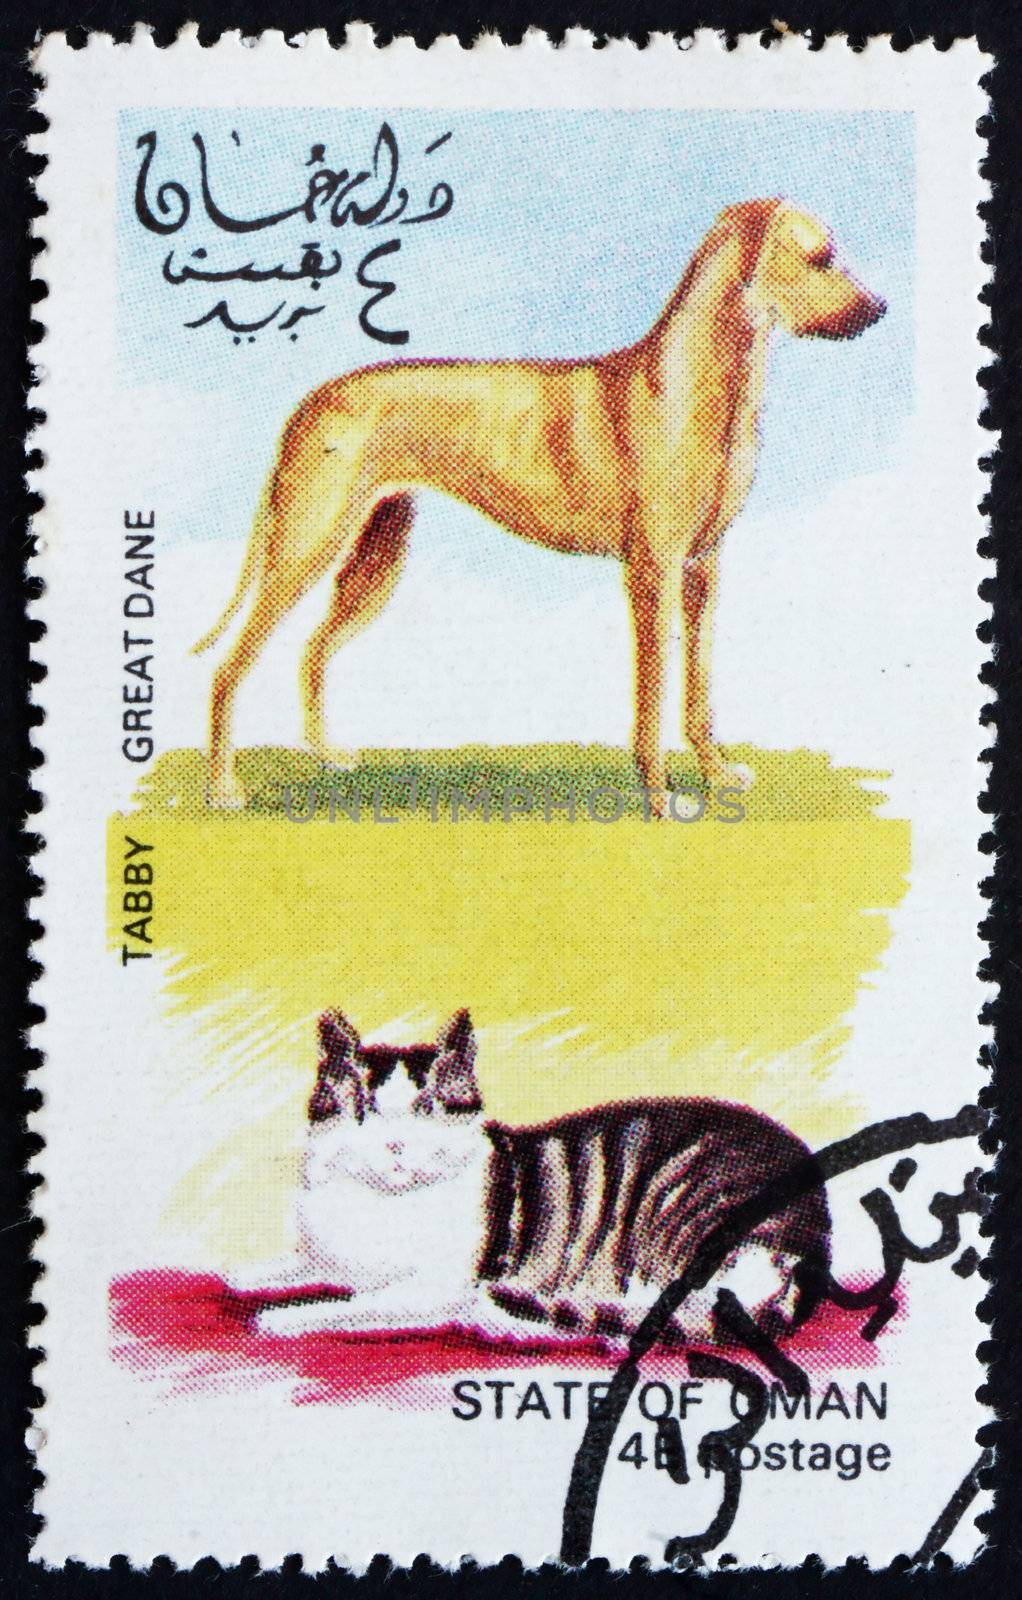 OMAN - CIRCA 1972: a stamp printed in the Oman shows Tabby Cat and Great Dane Dog, circa 1972